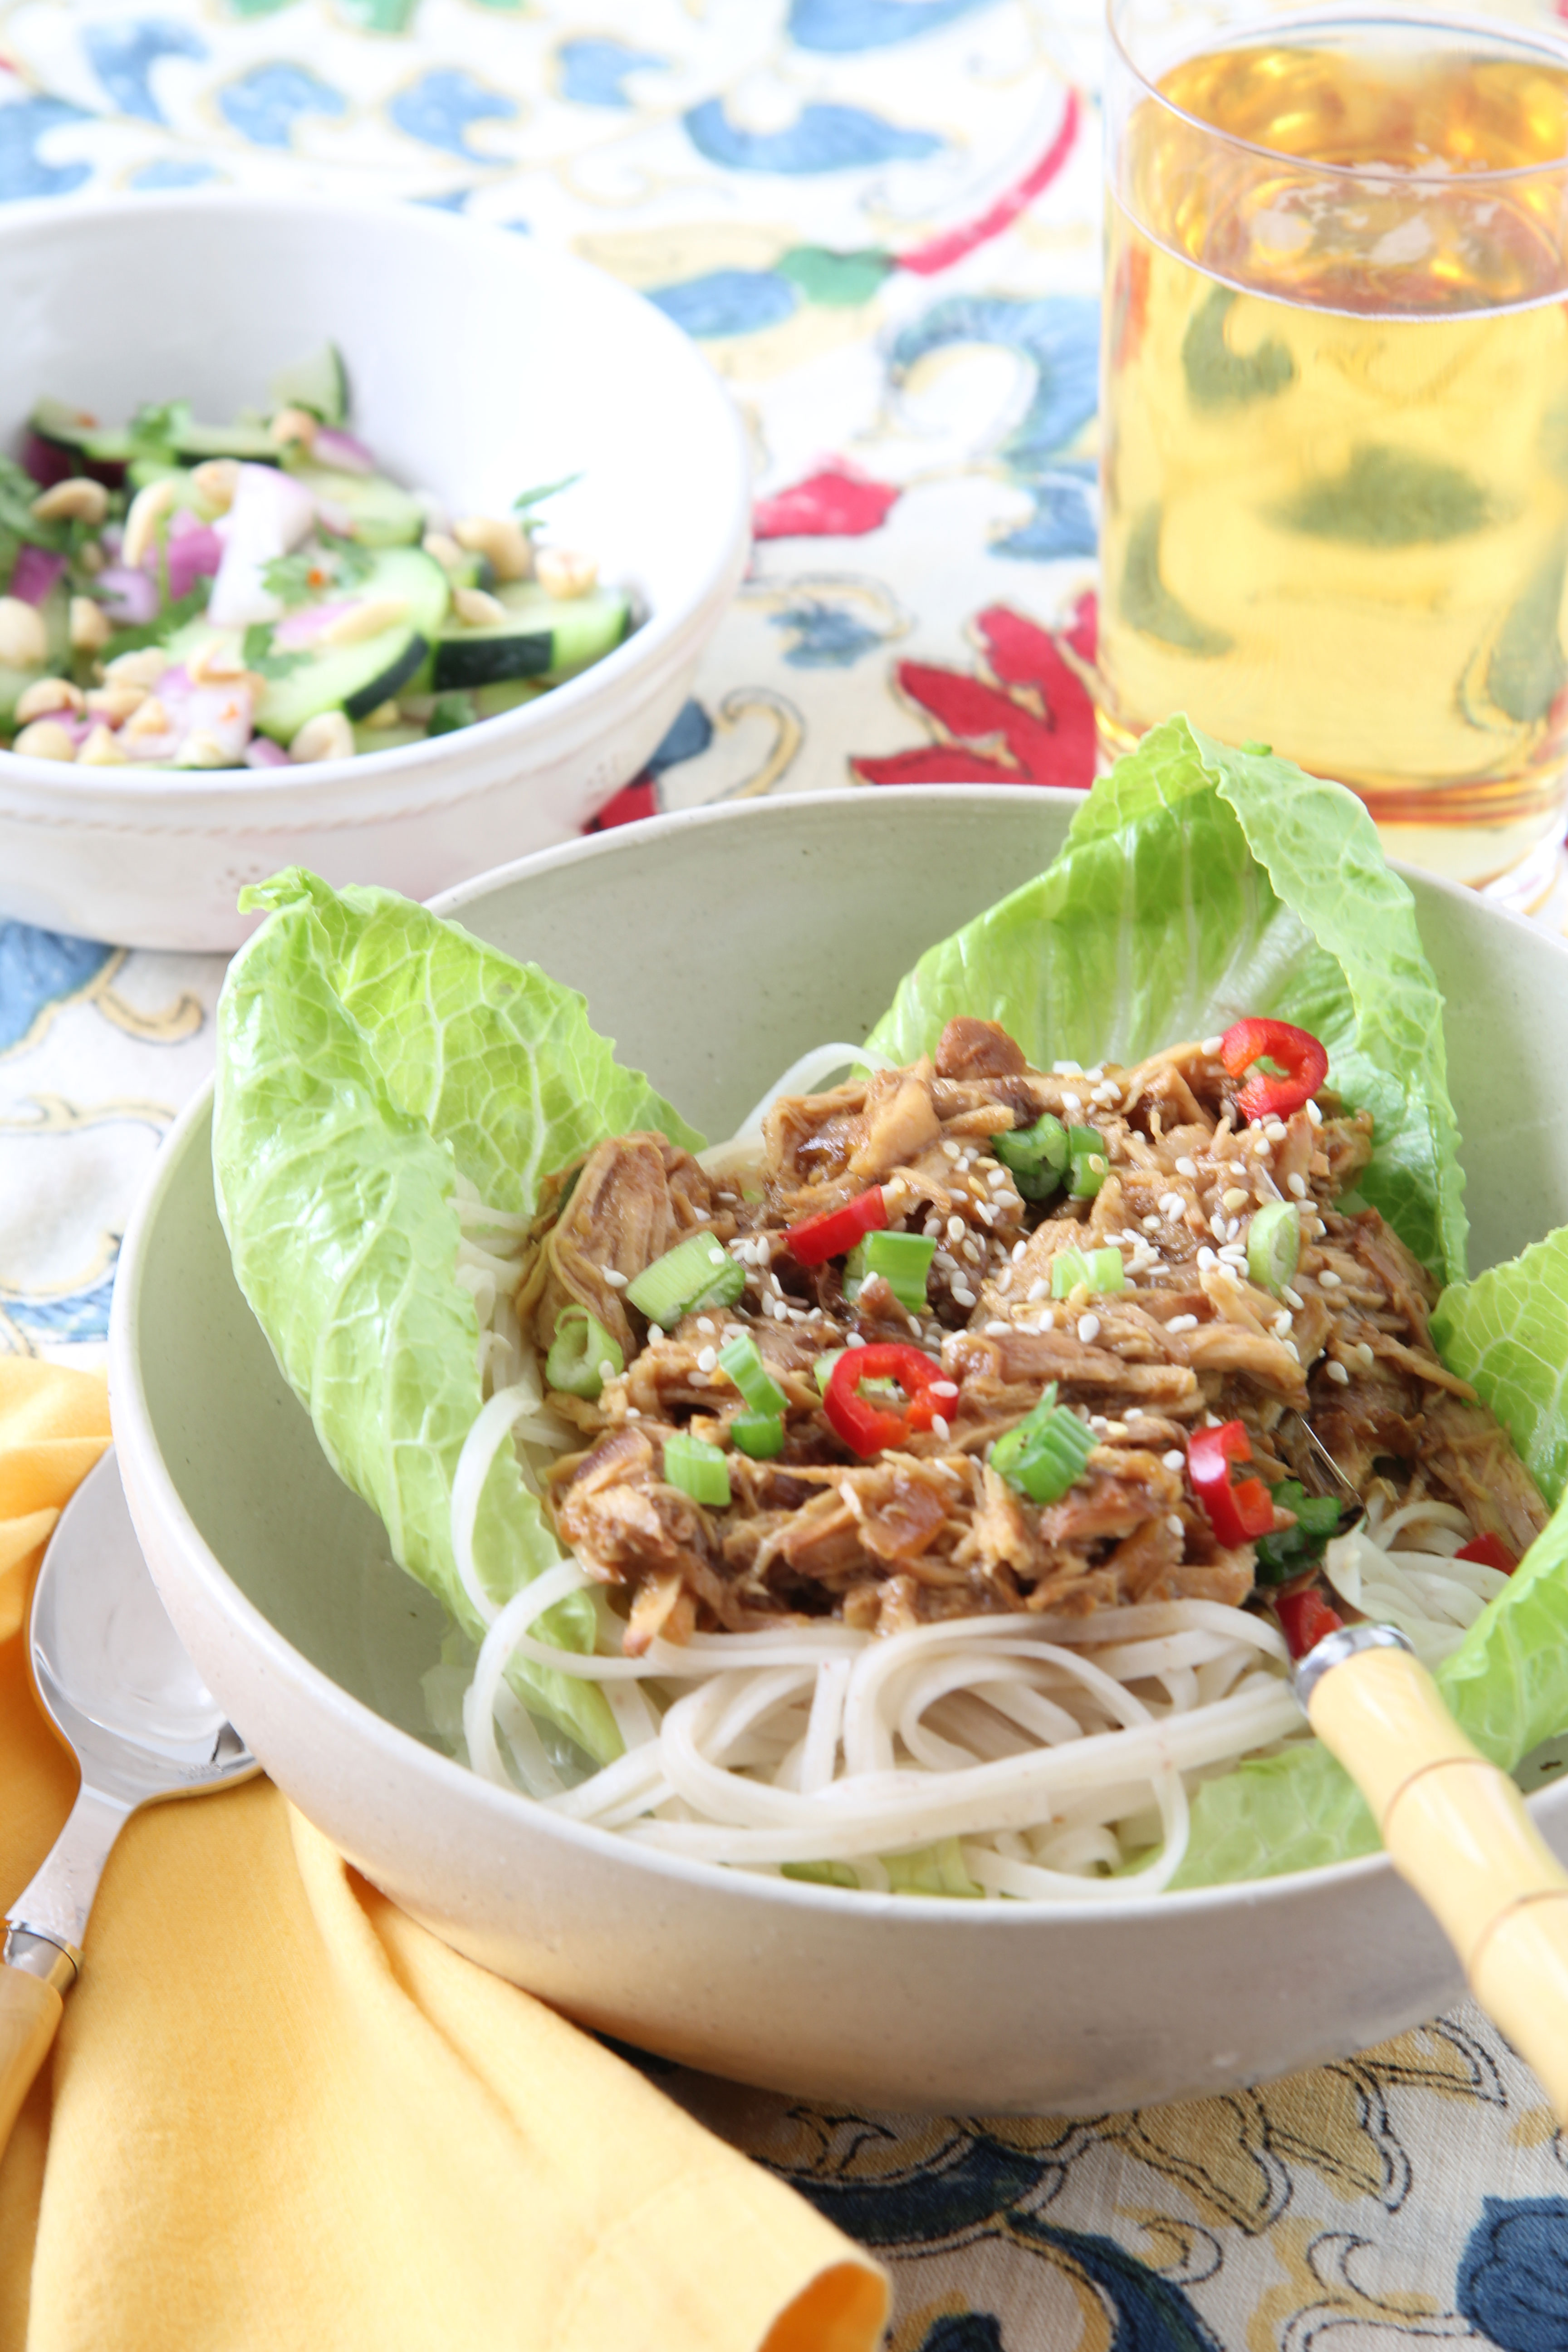 Looking for a new recipe, Ridgely Brode and her husband made Honey Sesame Pulled Pork Slow Cooker and Thai Cucumber Salad.